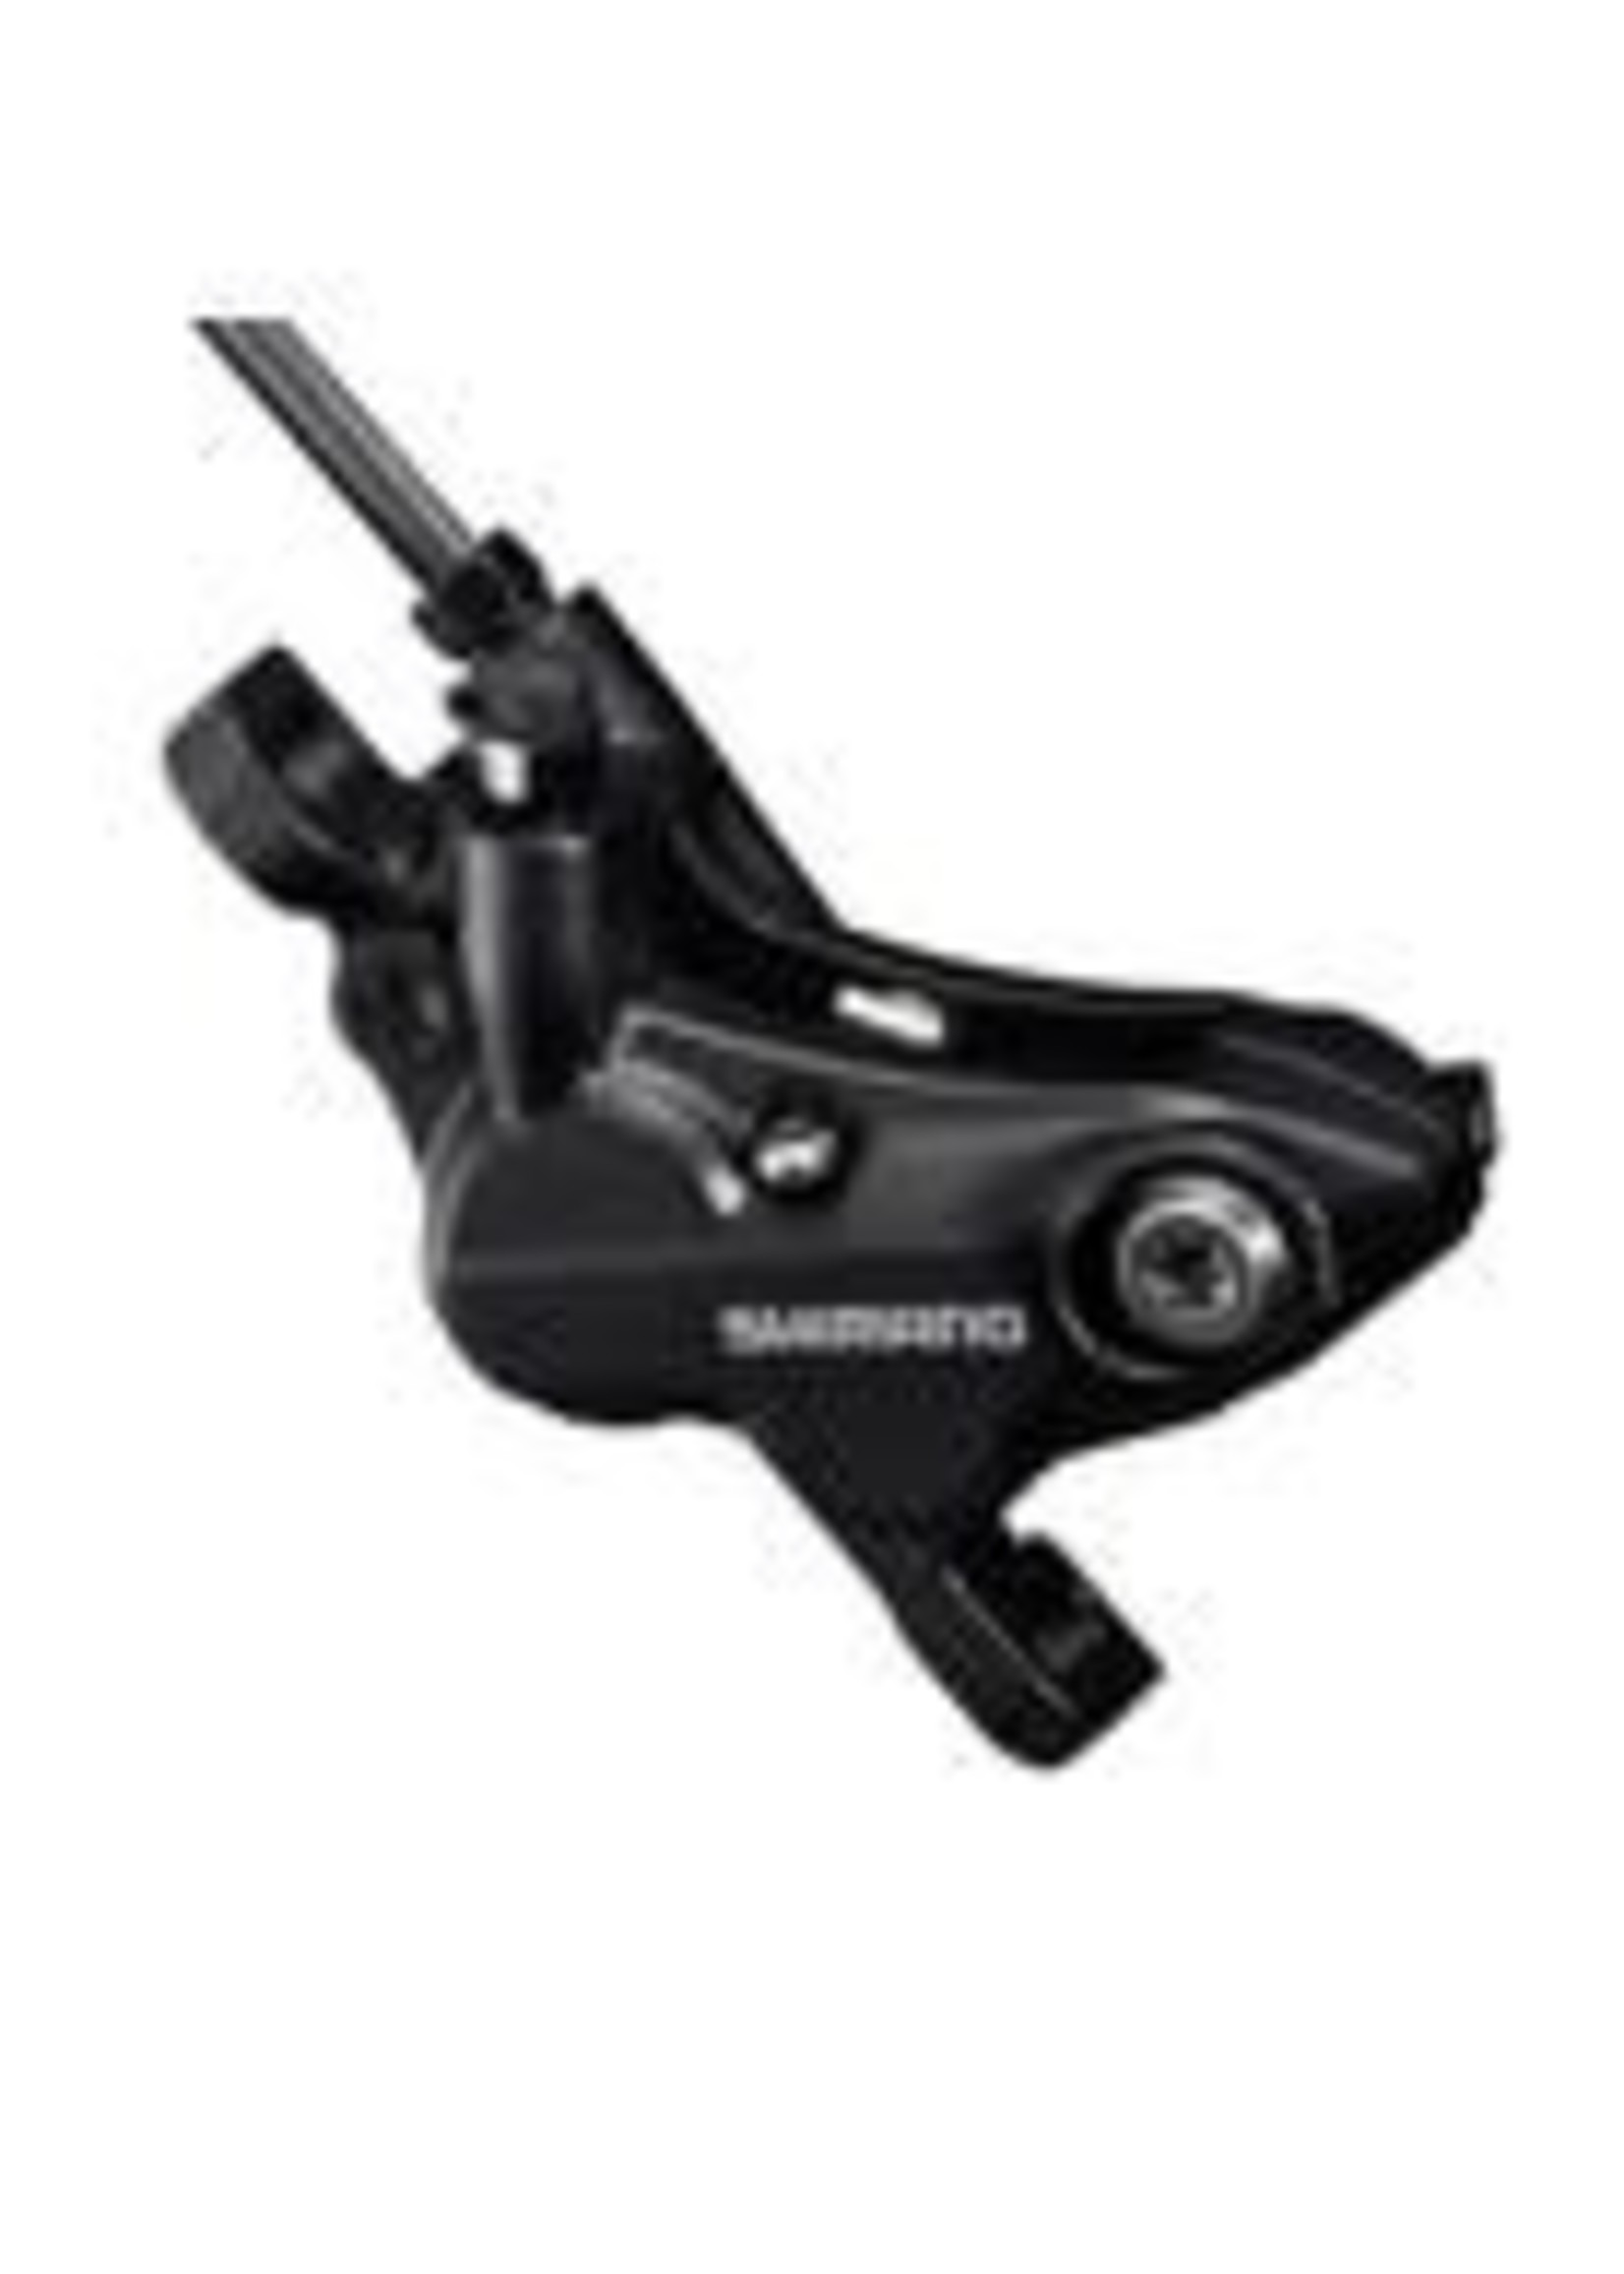 Shimano Shimano BR-MT520 4-Piston Disc Brake Caliper with Metal Pads, Front or Rear, Black